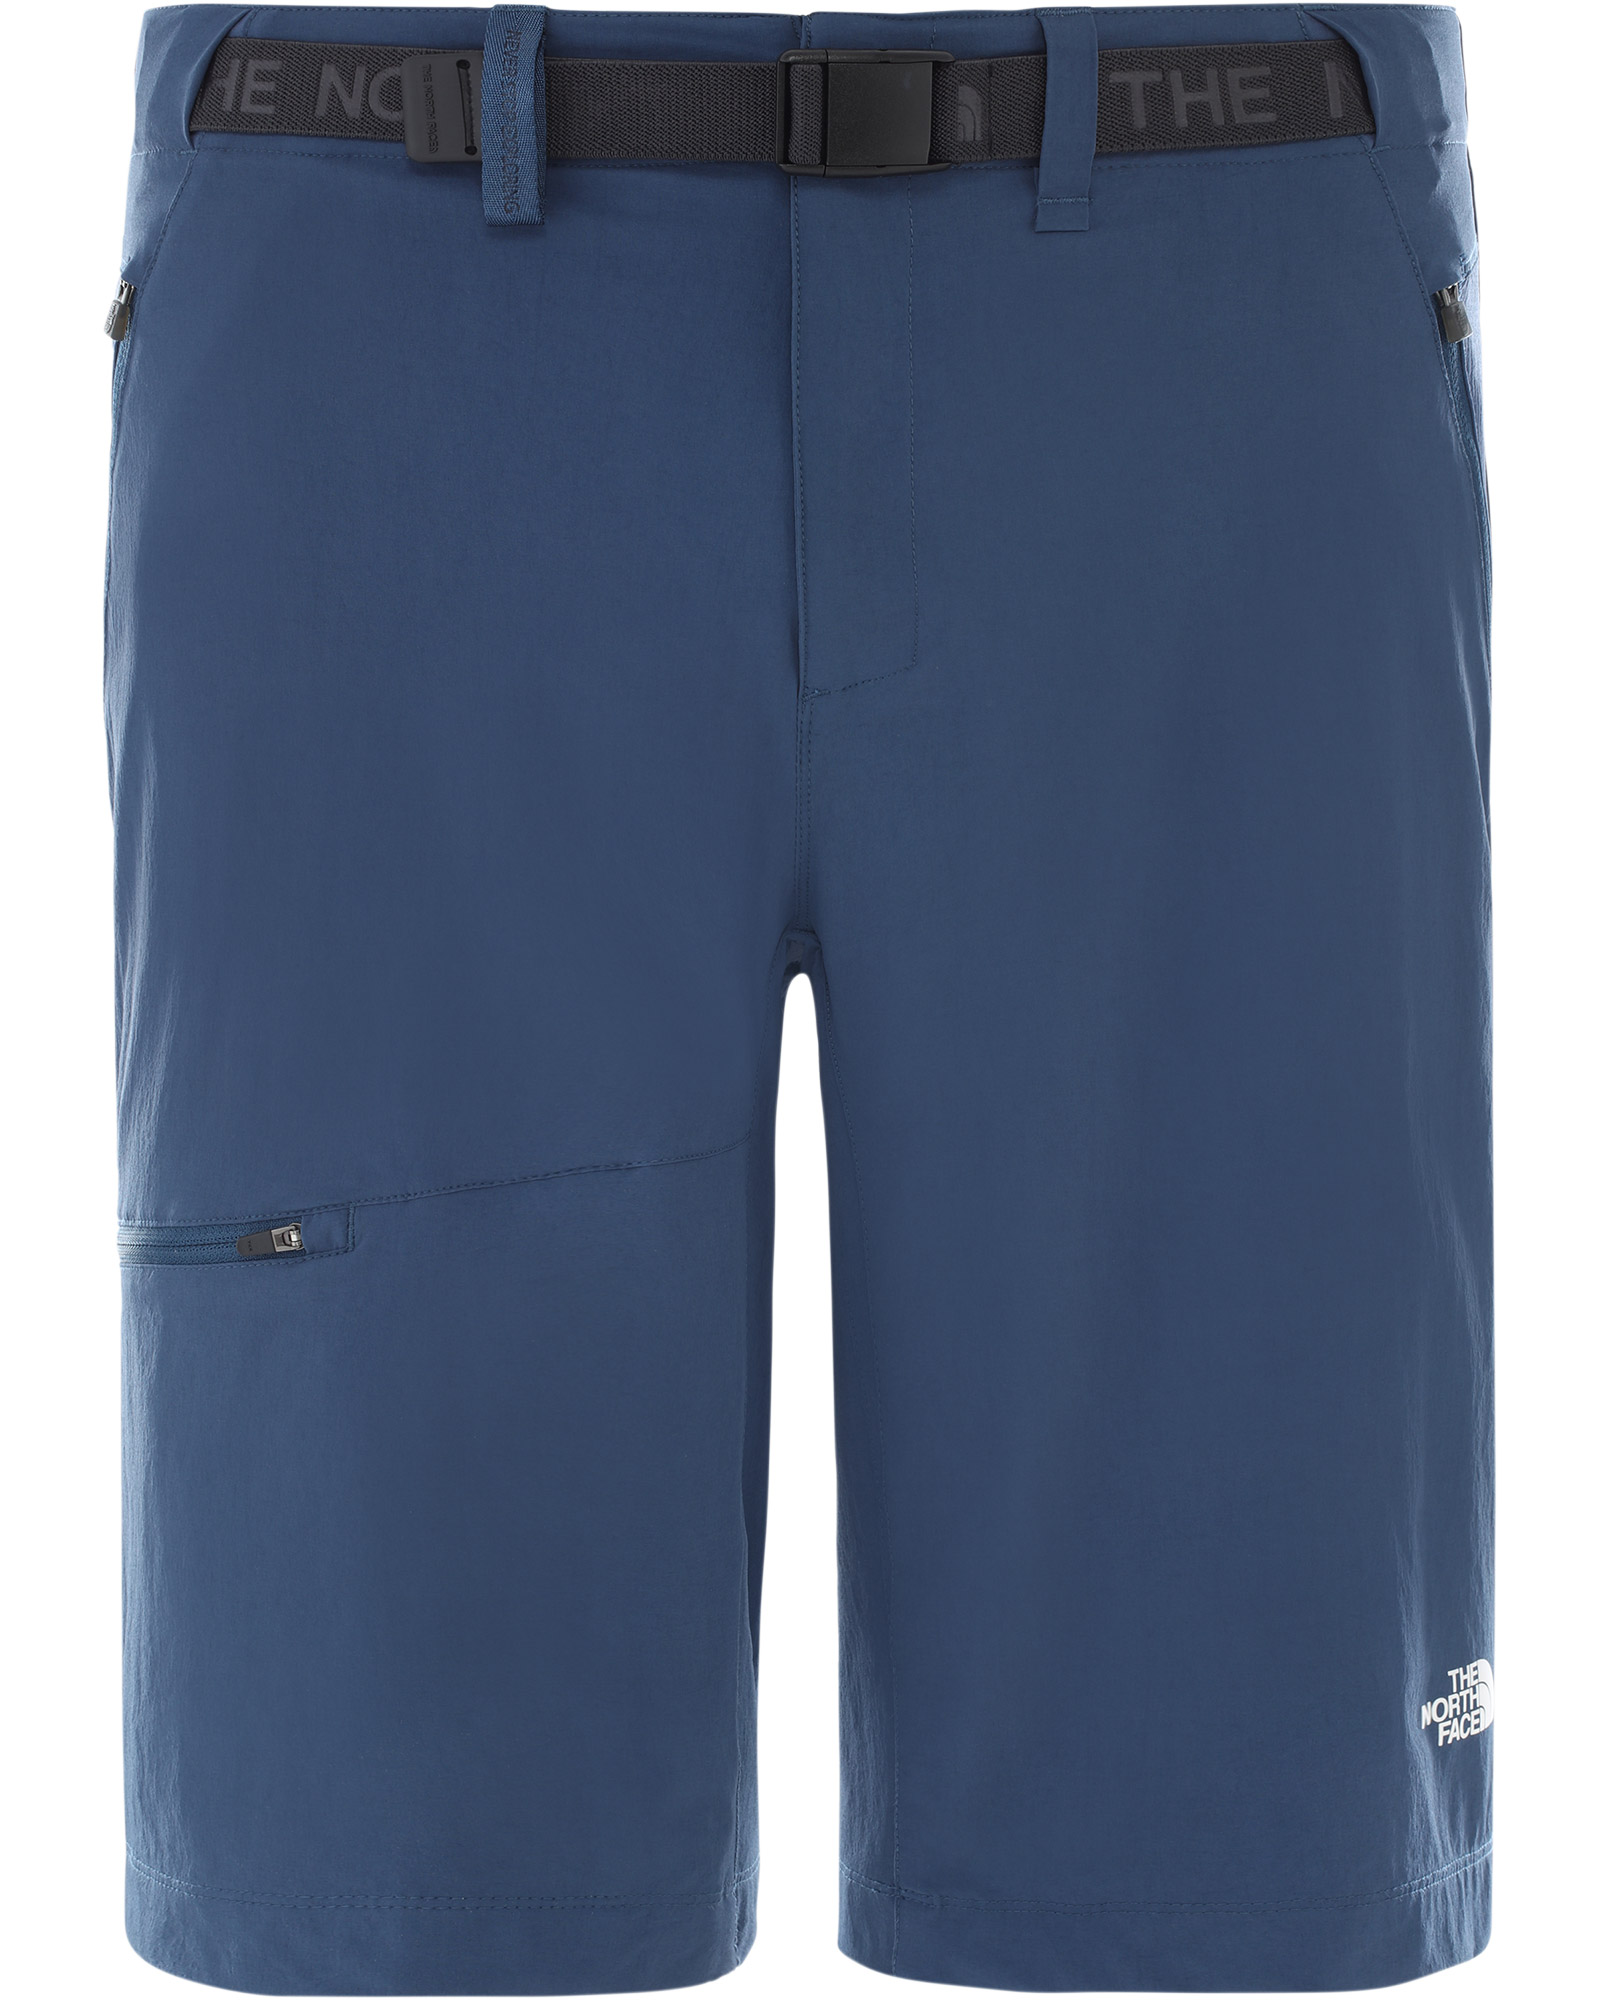 The North Face Speedlight Men’s Shorts - Blue Wing Teal 30"